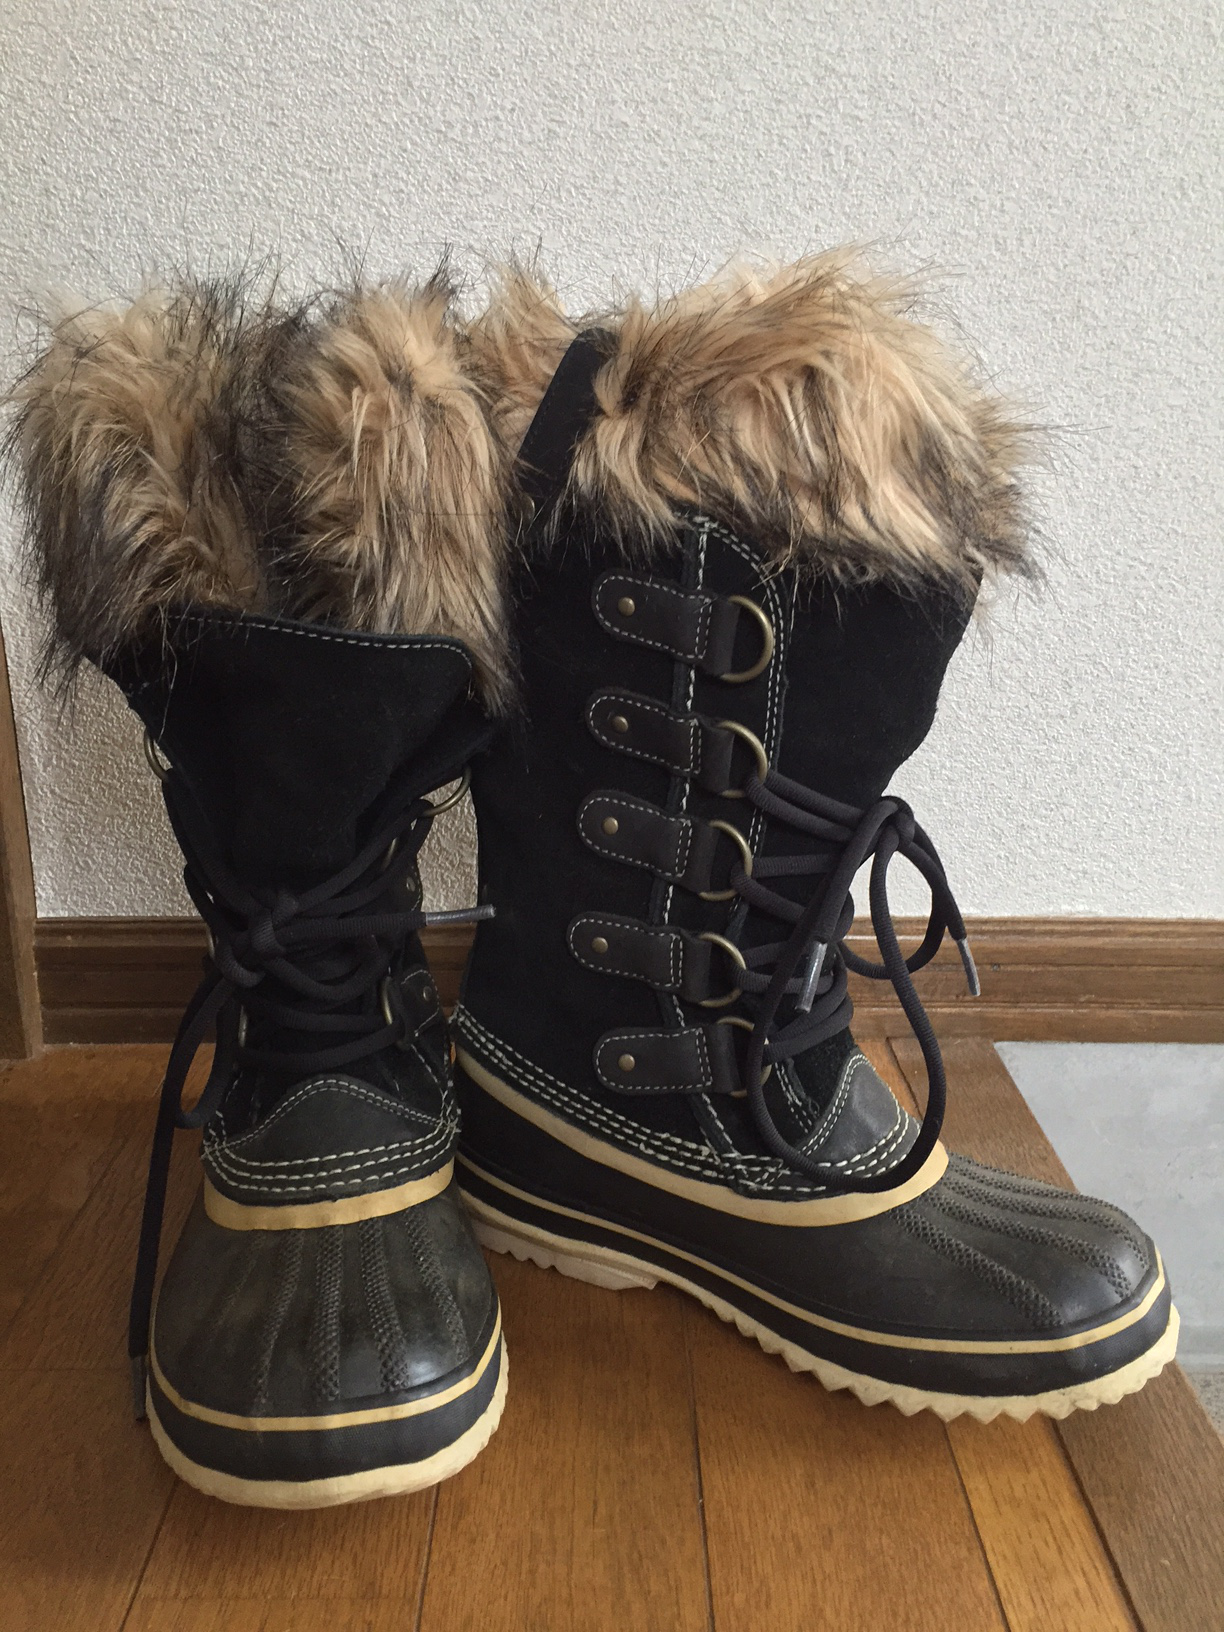 sorel boots for sale near me